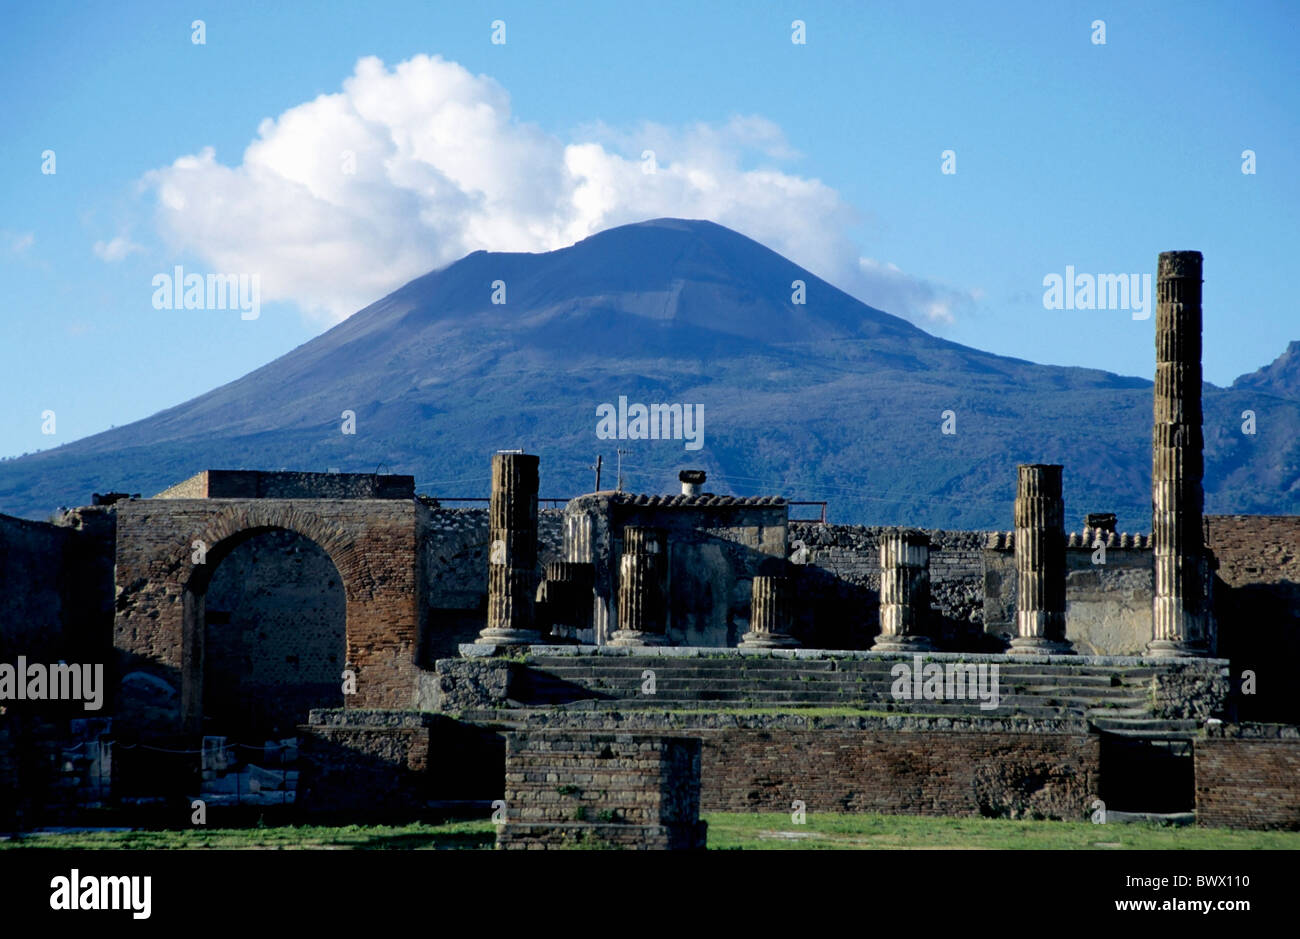 Old ruins of a forum with Mount Vesuvius in the background, Pompeii, Italy. Stock Photo